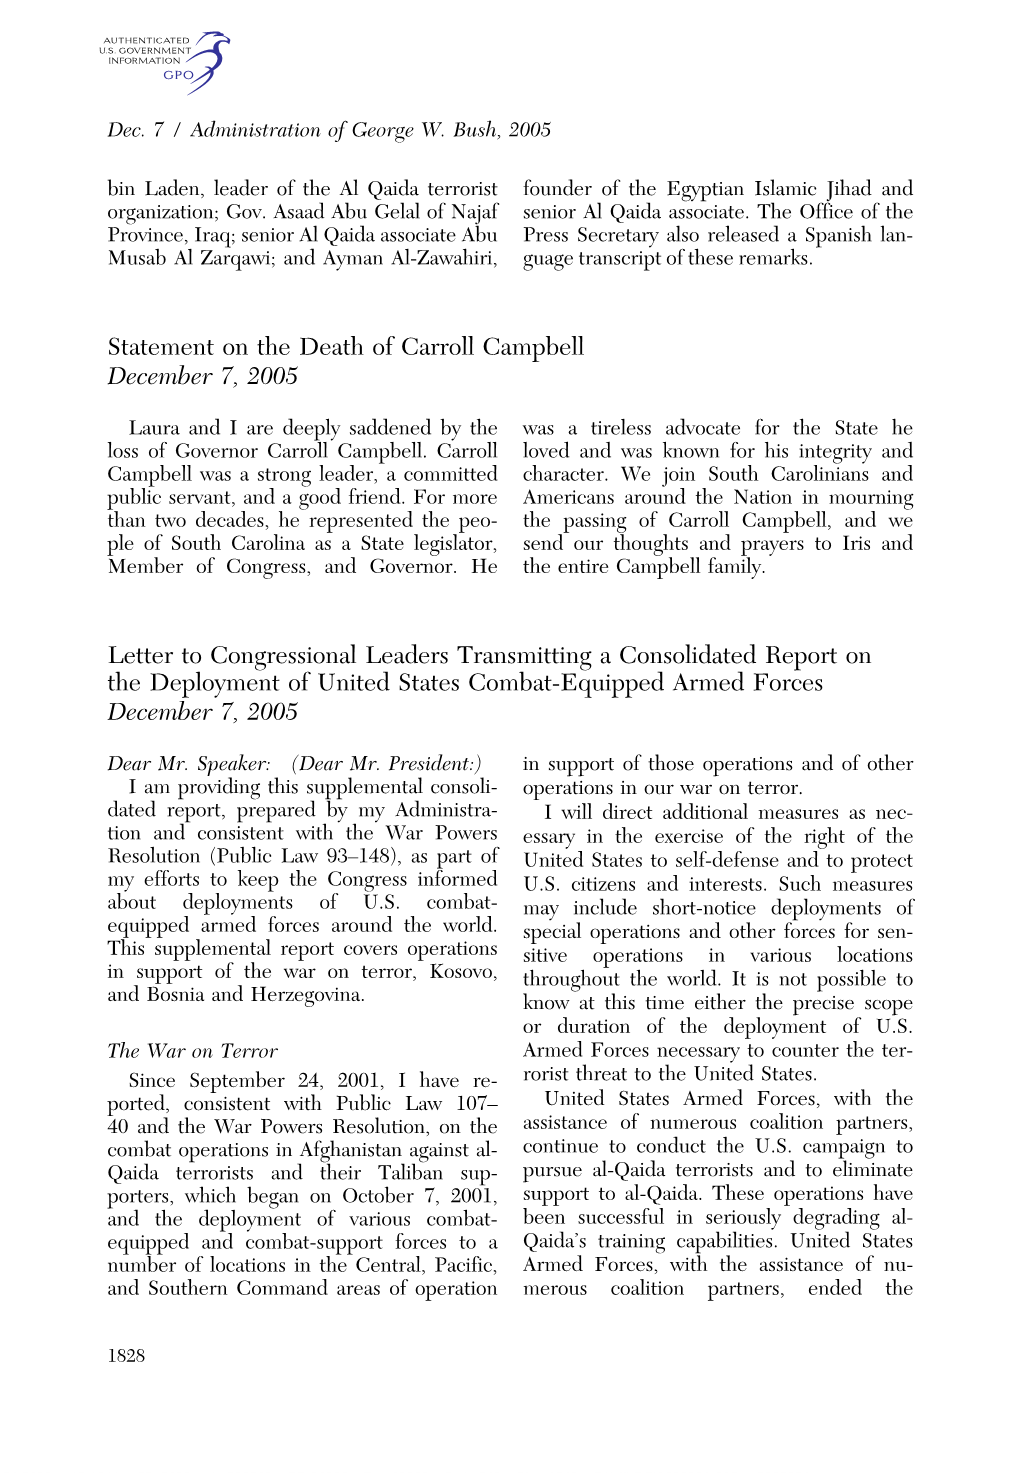 Statement on the Death of Carroll Campbell December 7, 2005 Letter